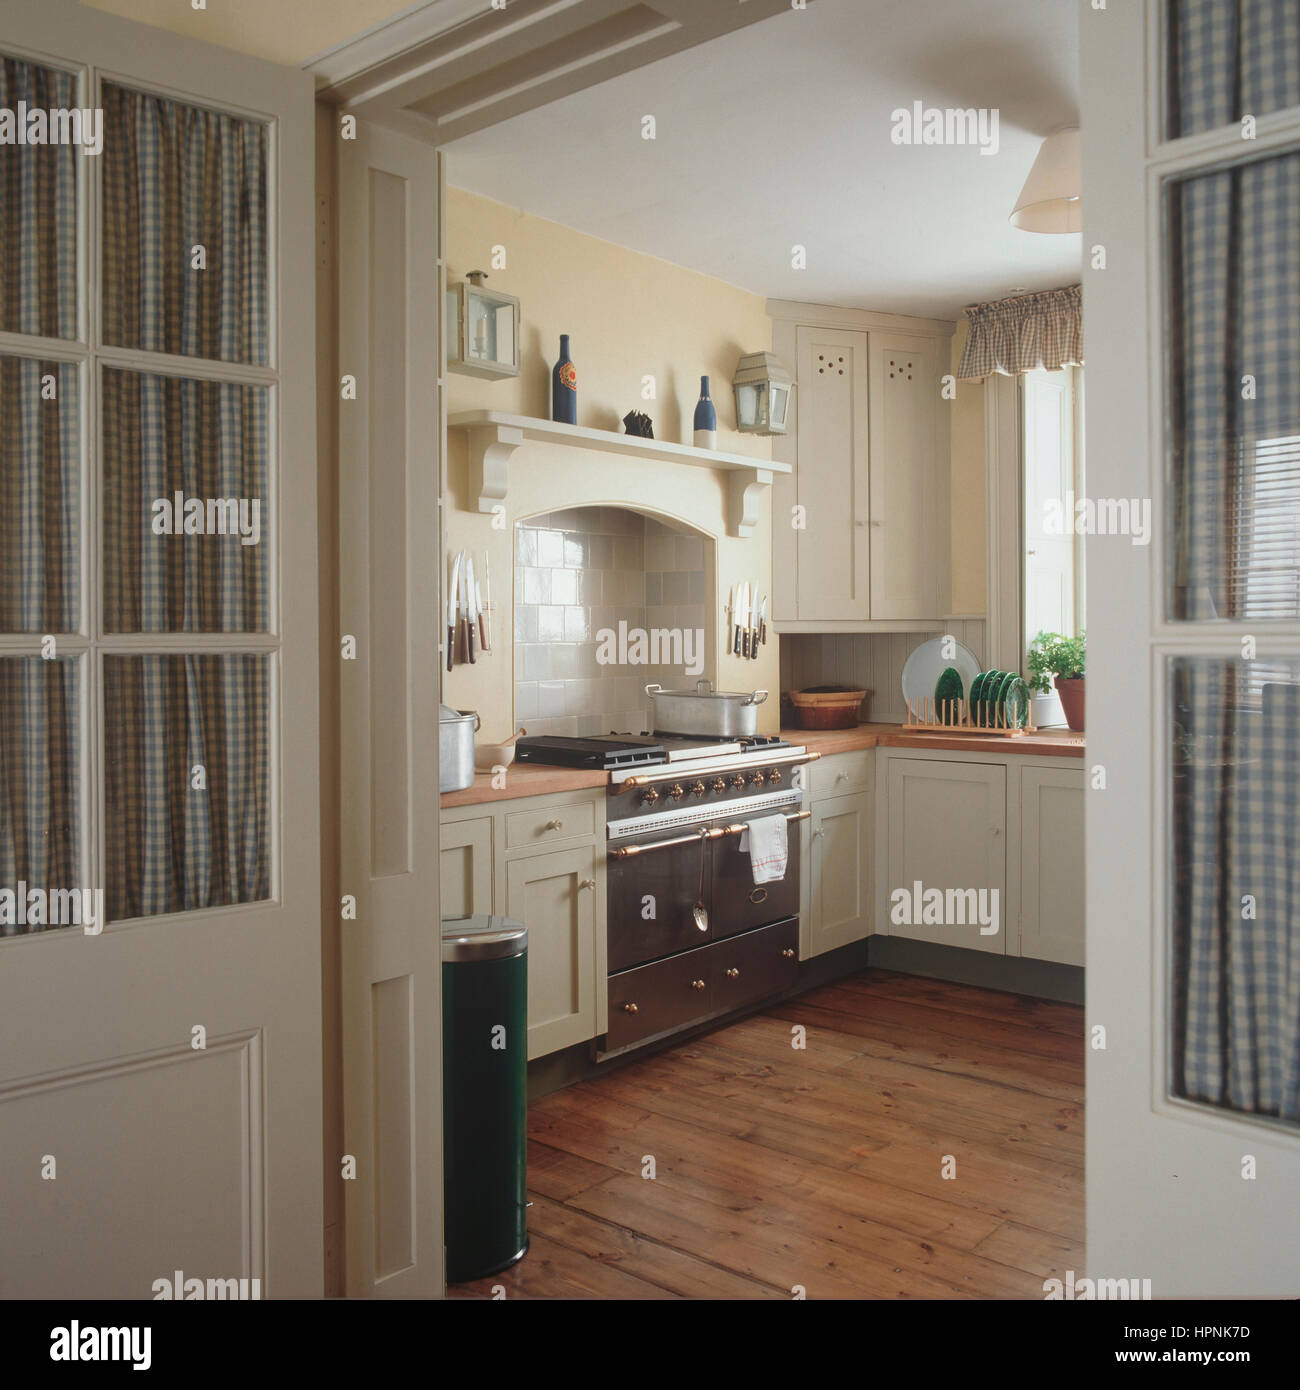 An open door to a kitchen. Stock Photo